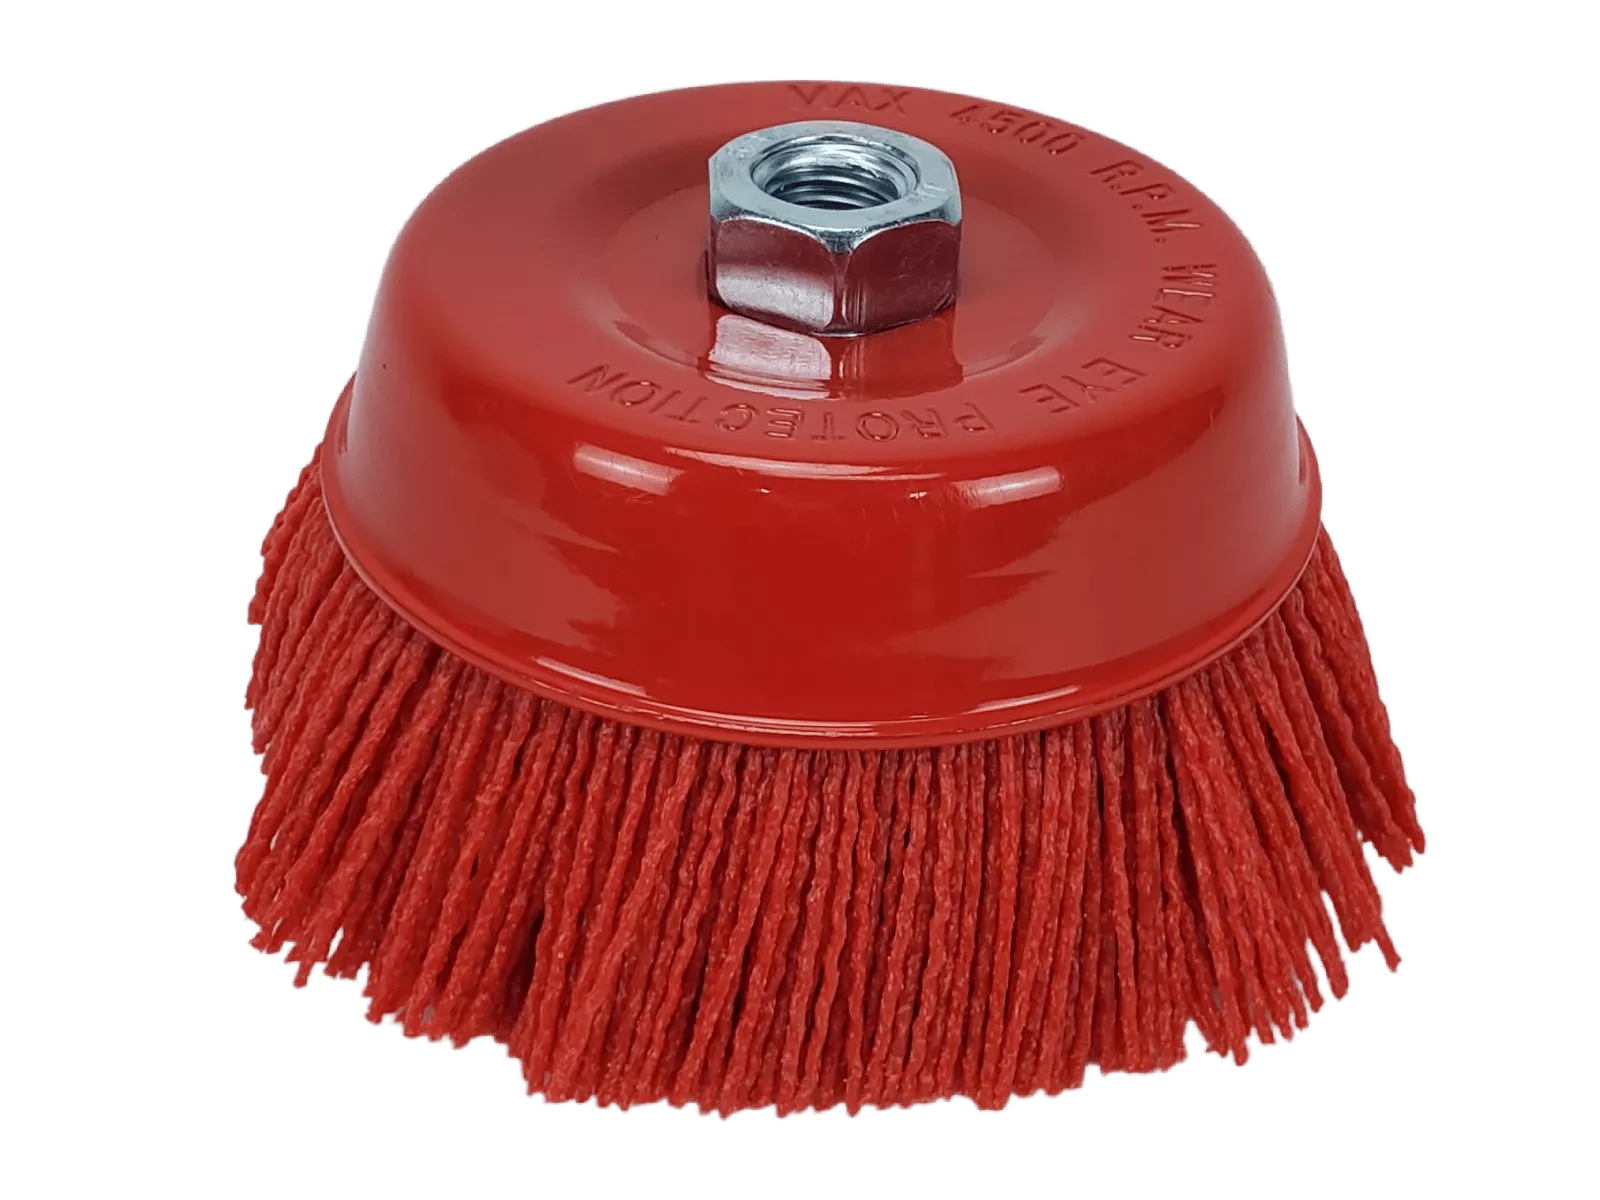 Red cup brush, a versatile tool used for bedliner application and surface preparation.